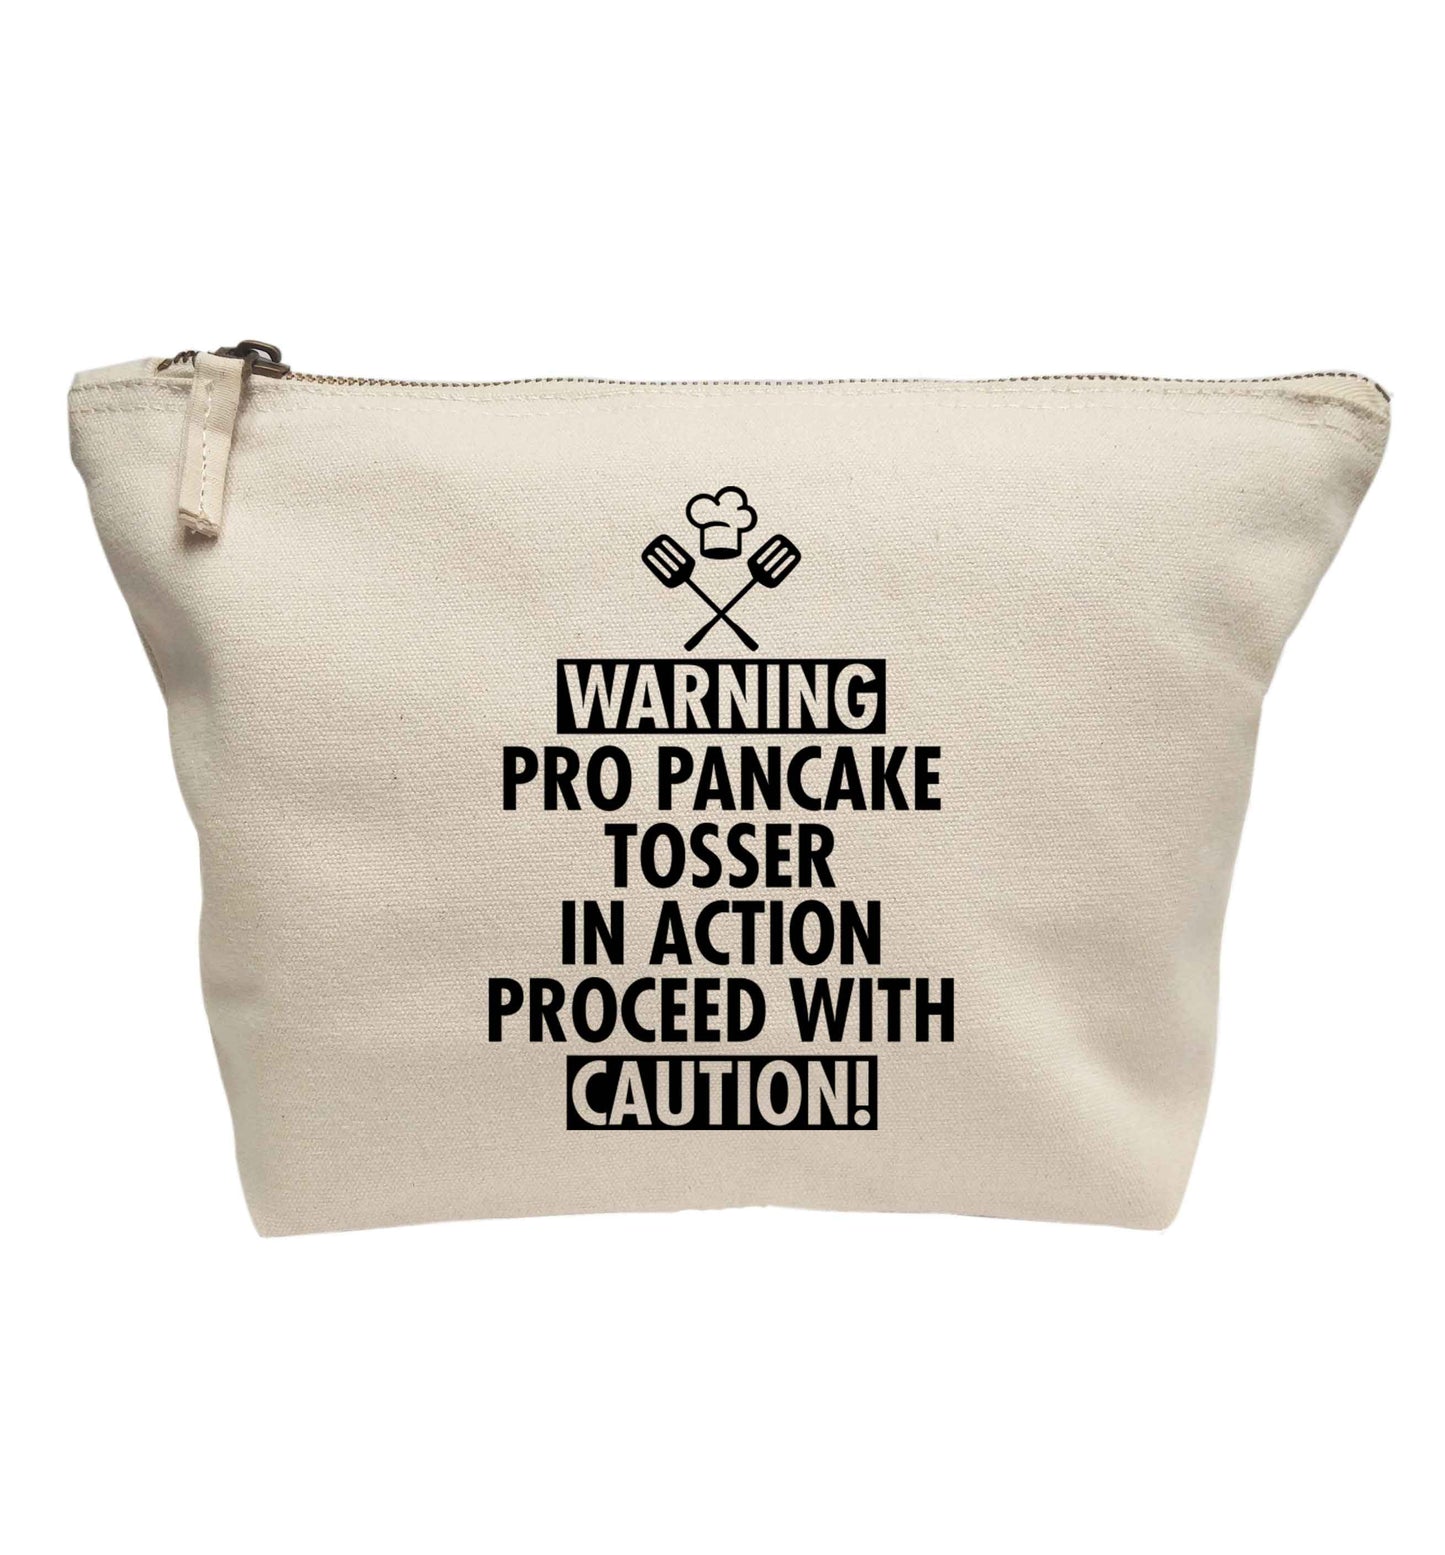 Warning pro pancake tosser in action proceed with caution | Makeup / wash bag